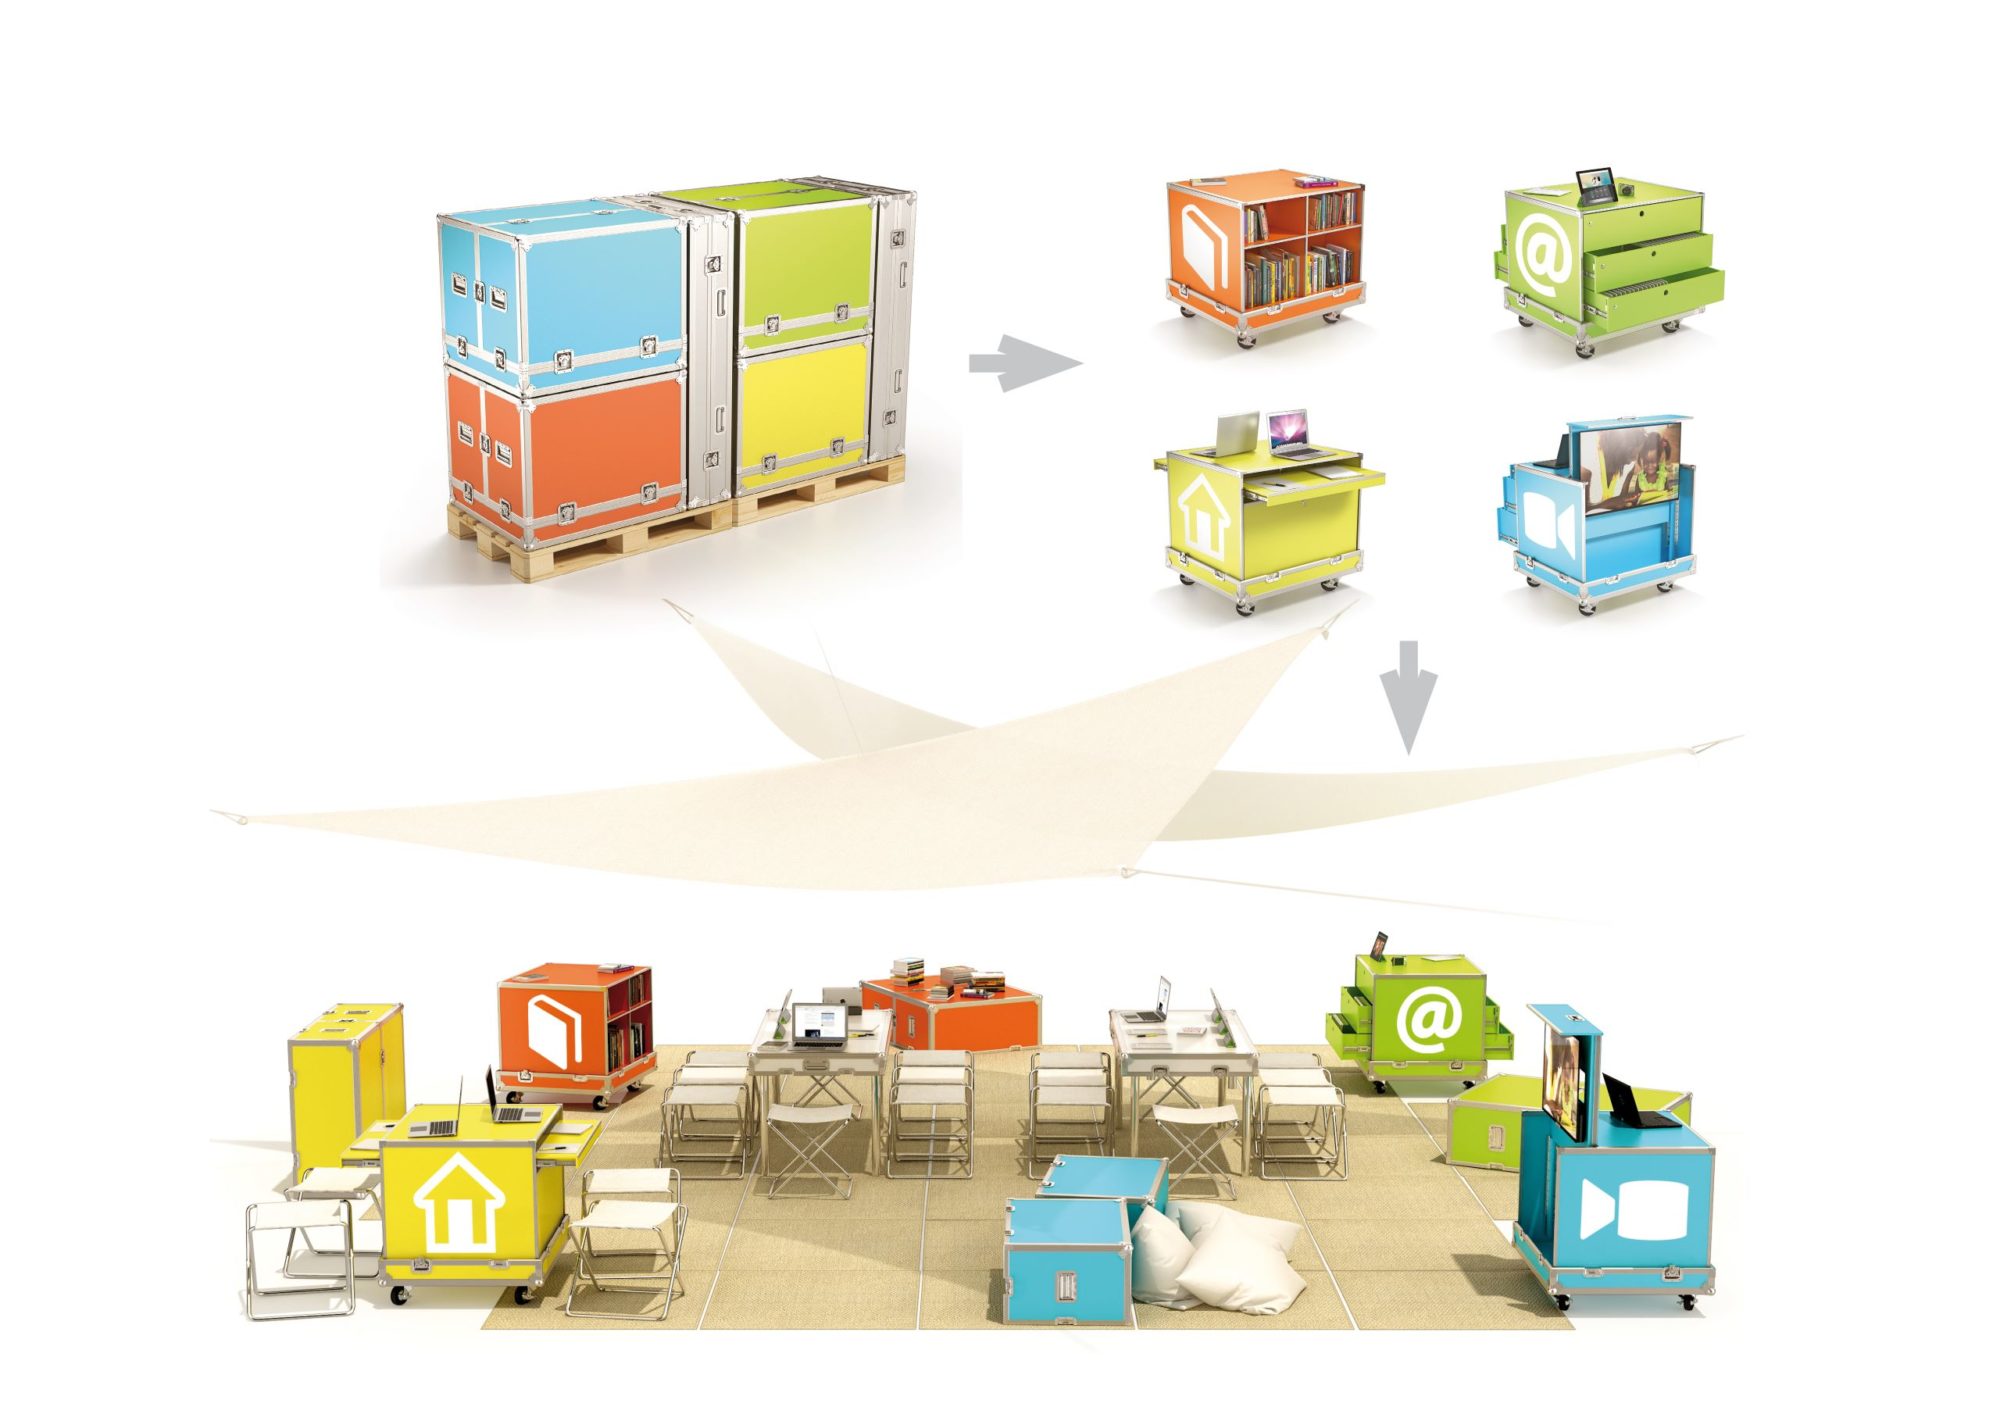 A detailed diagram showing the progression between the transport, disassembly, and set-up of the Ideas Box modules.